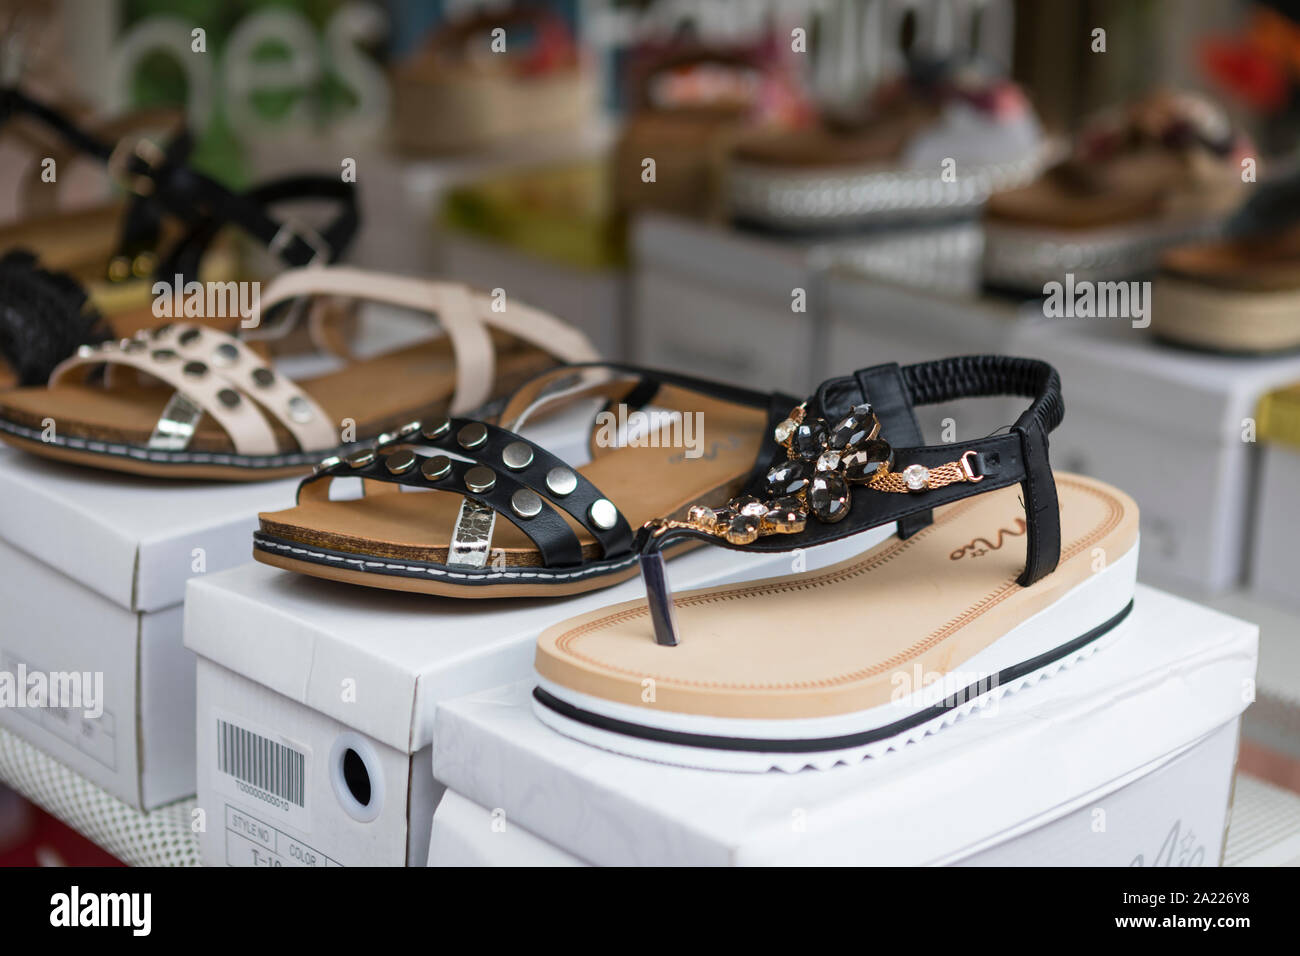 Shoes and sandals for sale at a shop in Germany Stock Photo